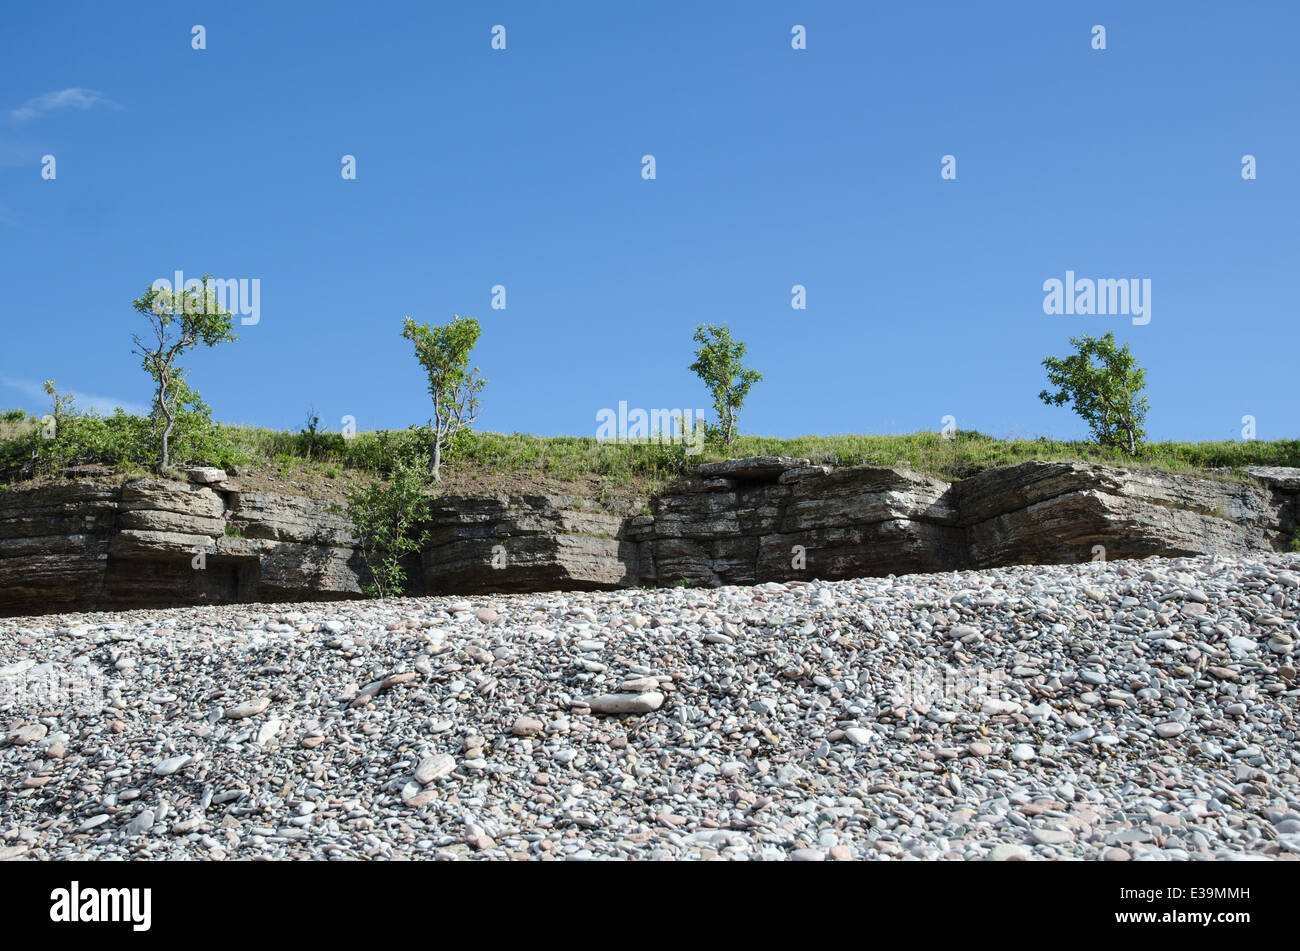 Trees at the frontline of cliffs by a coast with pebbles at the swedish island Oland Stock Photo